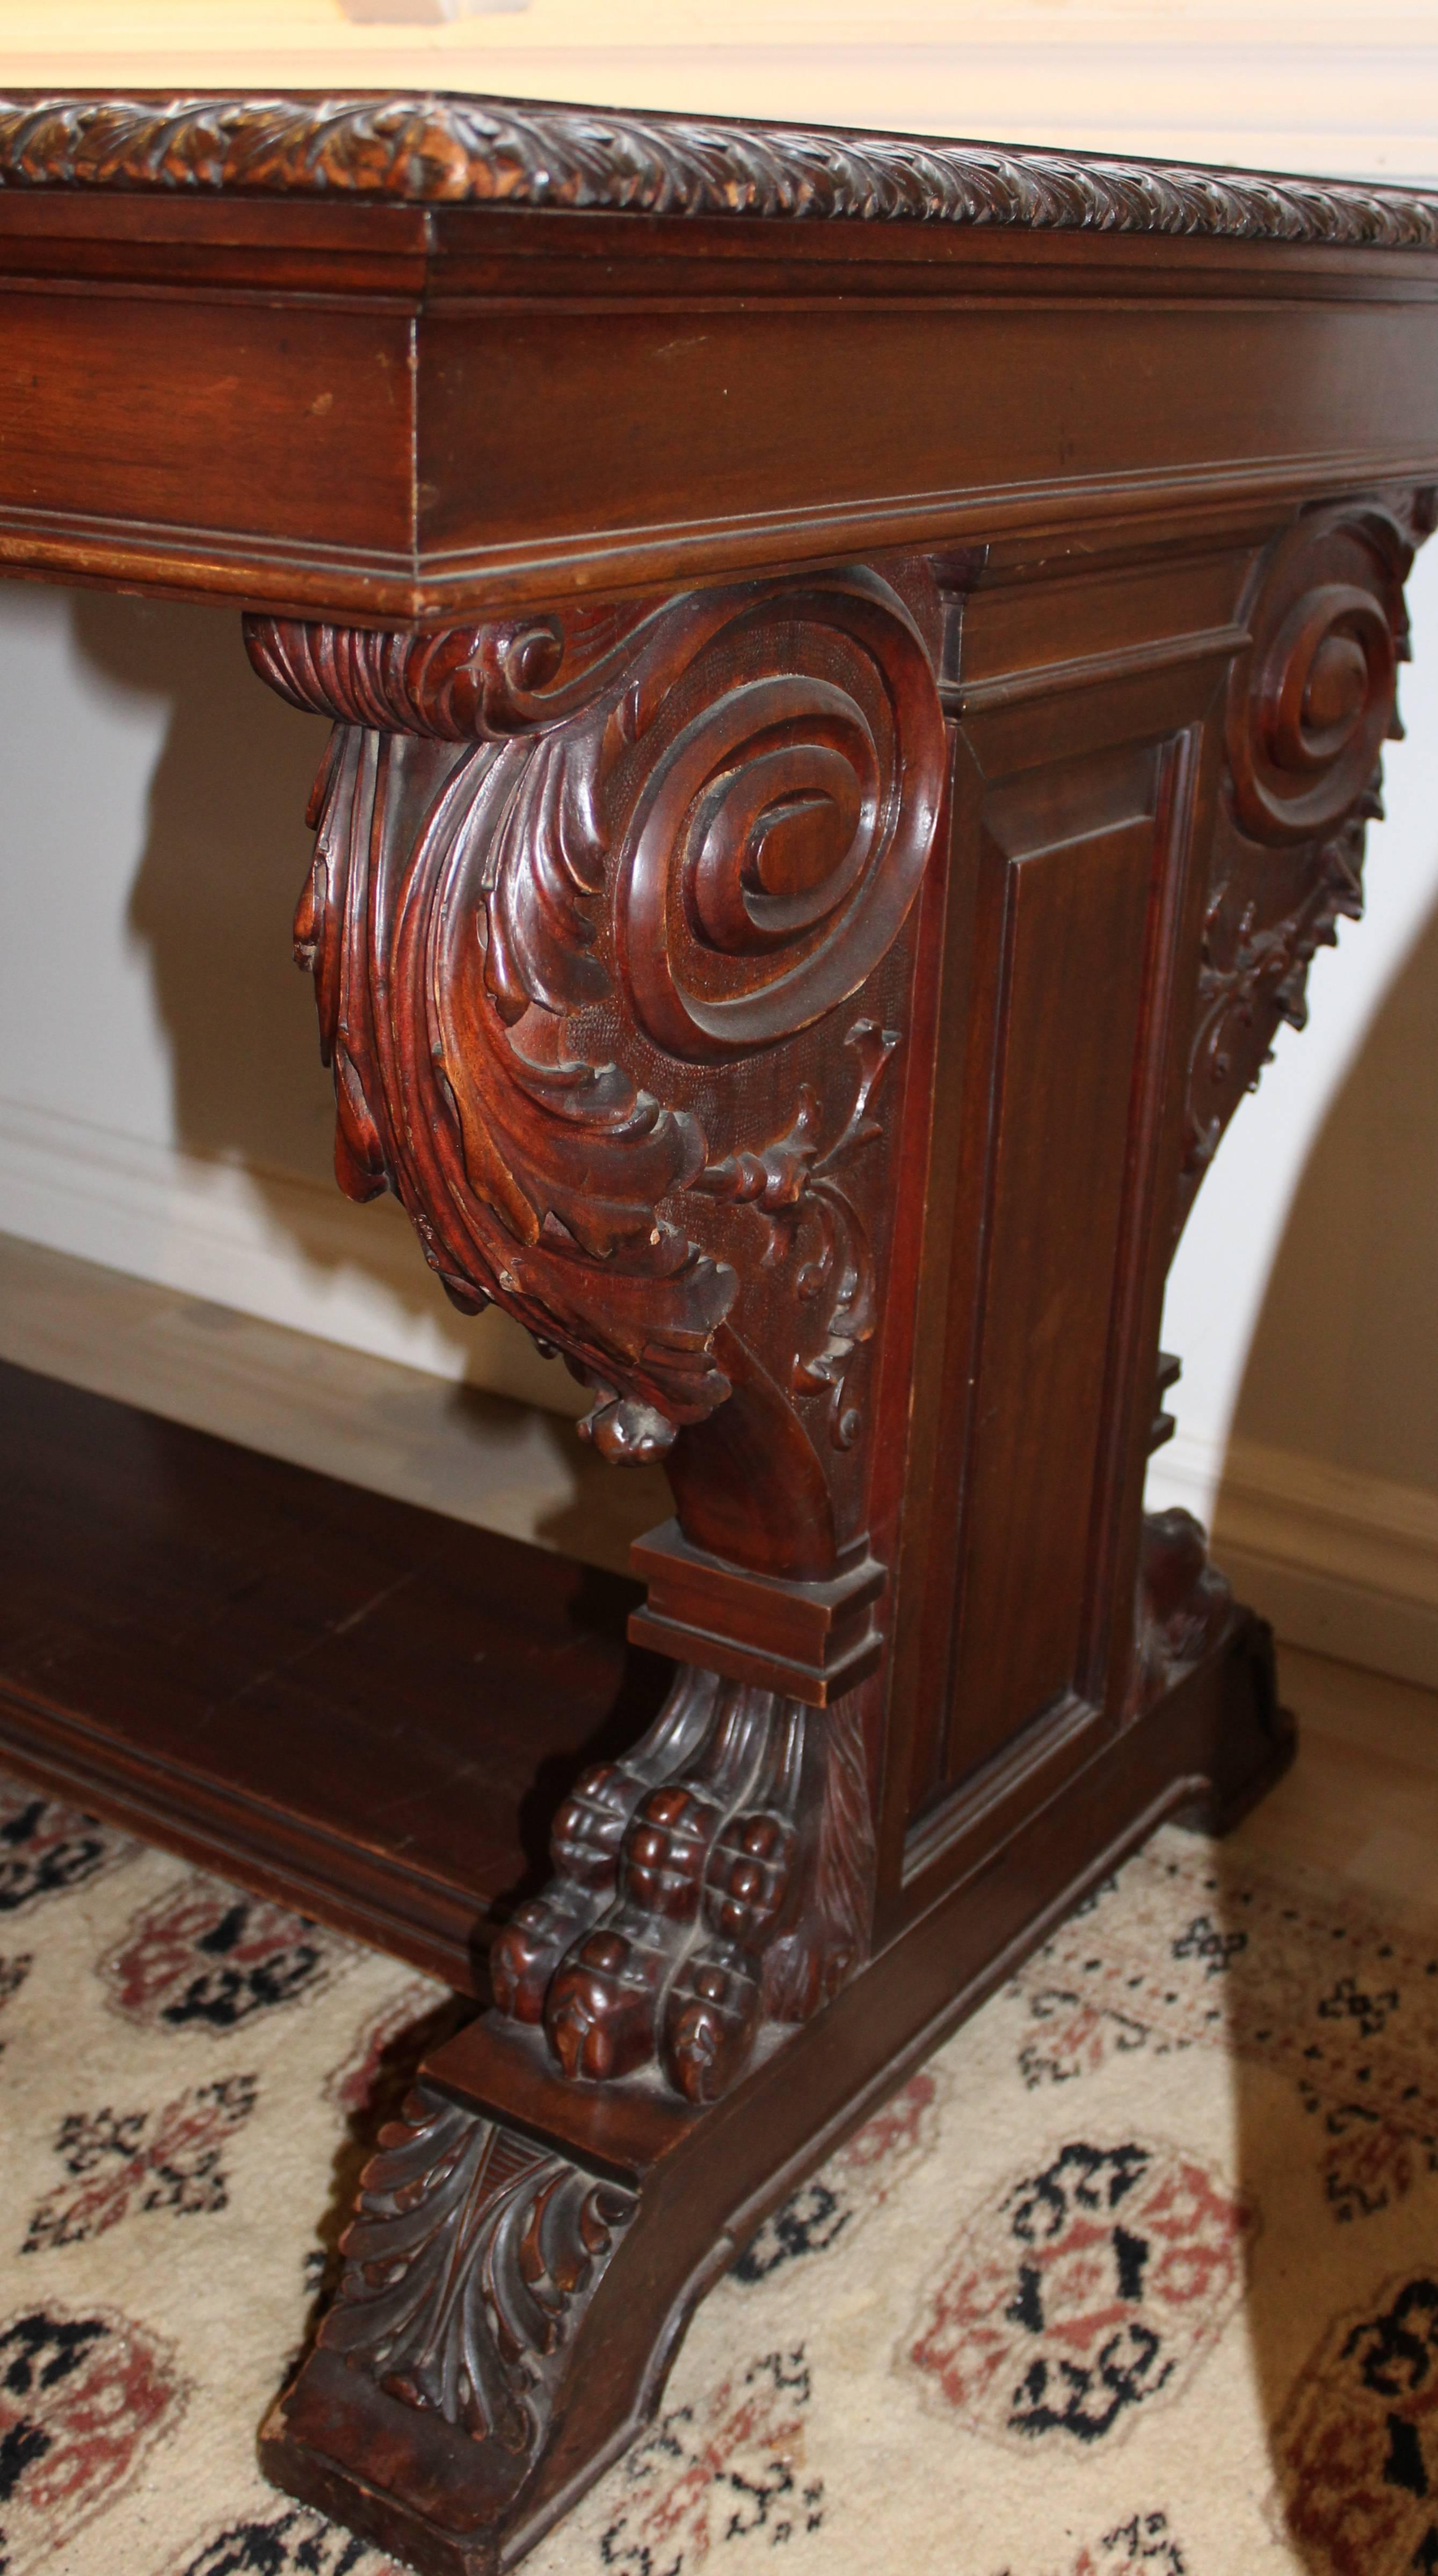 19th century Gothic Revival Scottish library table or desk.